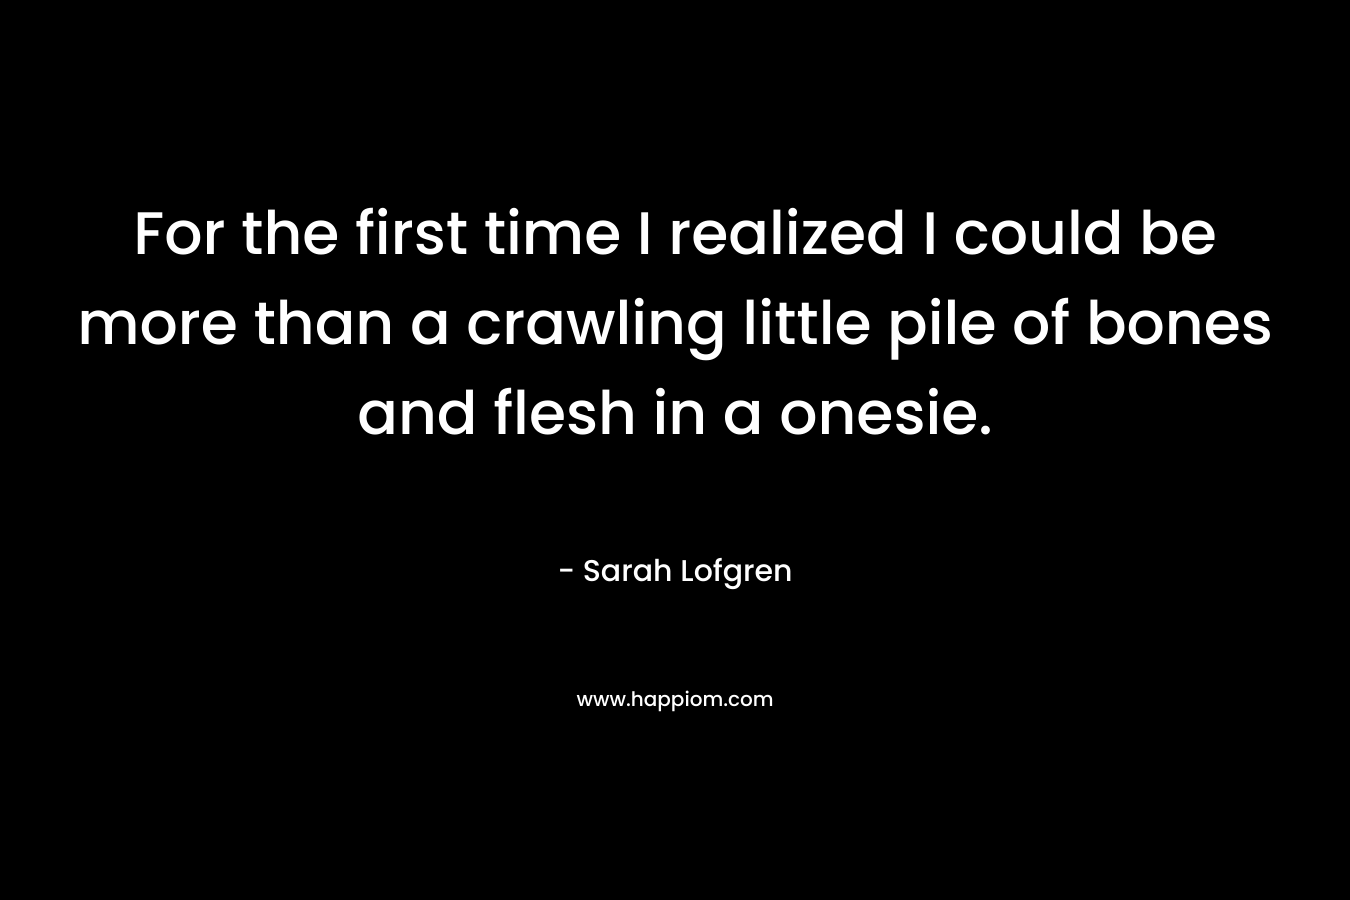 For the first time I realized I could be more than a crawling little pile of bones and flesh in a onesie. – Sarah Lofgren